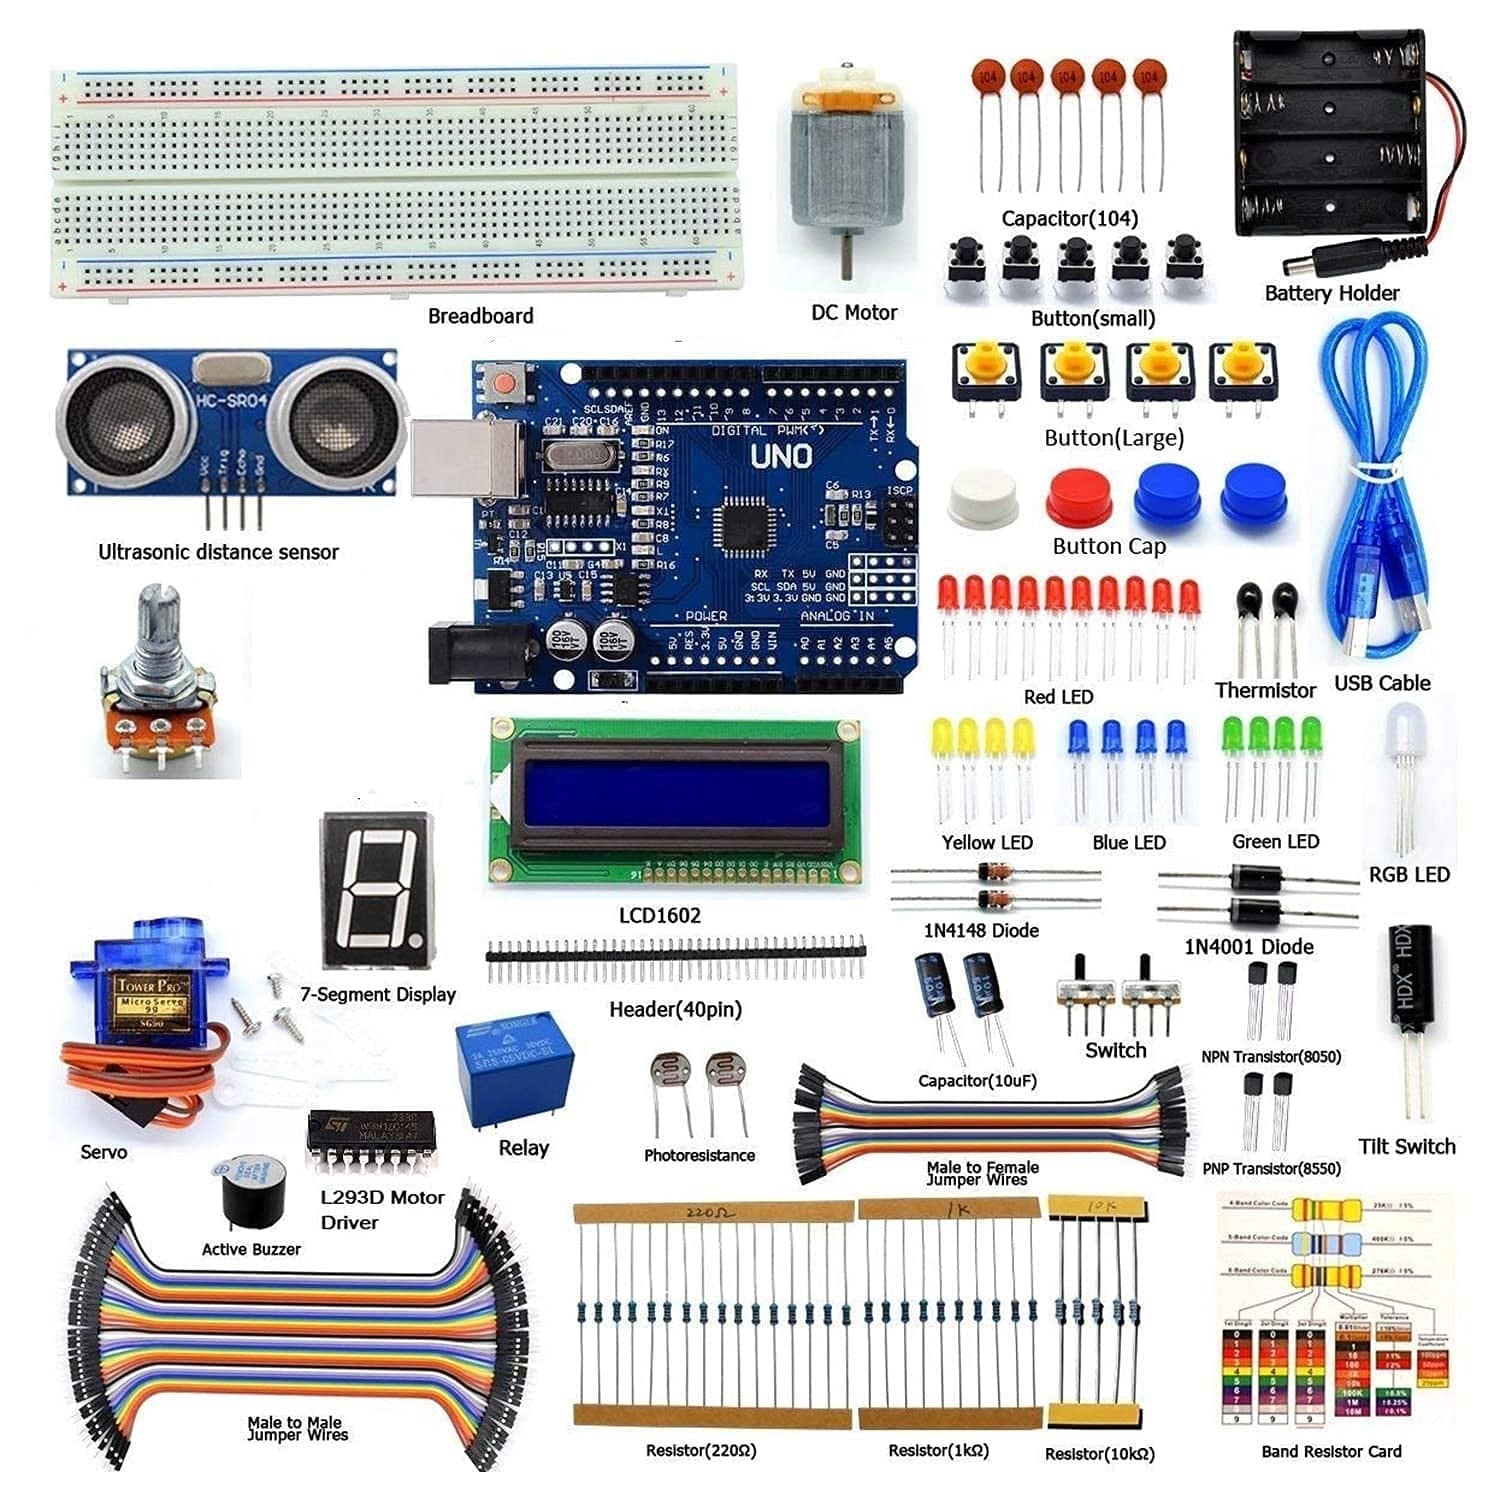 DIY Ultrasonic Distance Sensor Starter Kit For Compatible with Smd UNO IDE Projects - B0B8DF3D8W - REES52